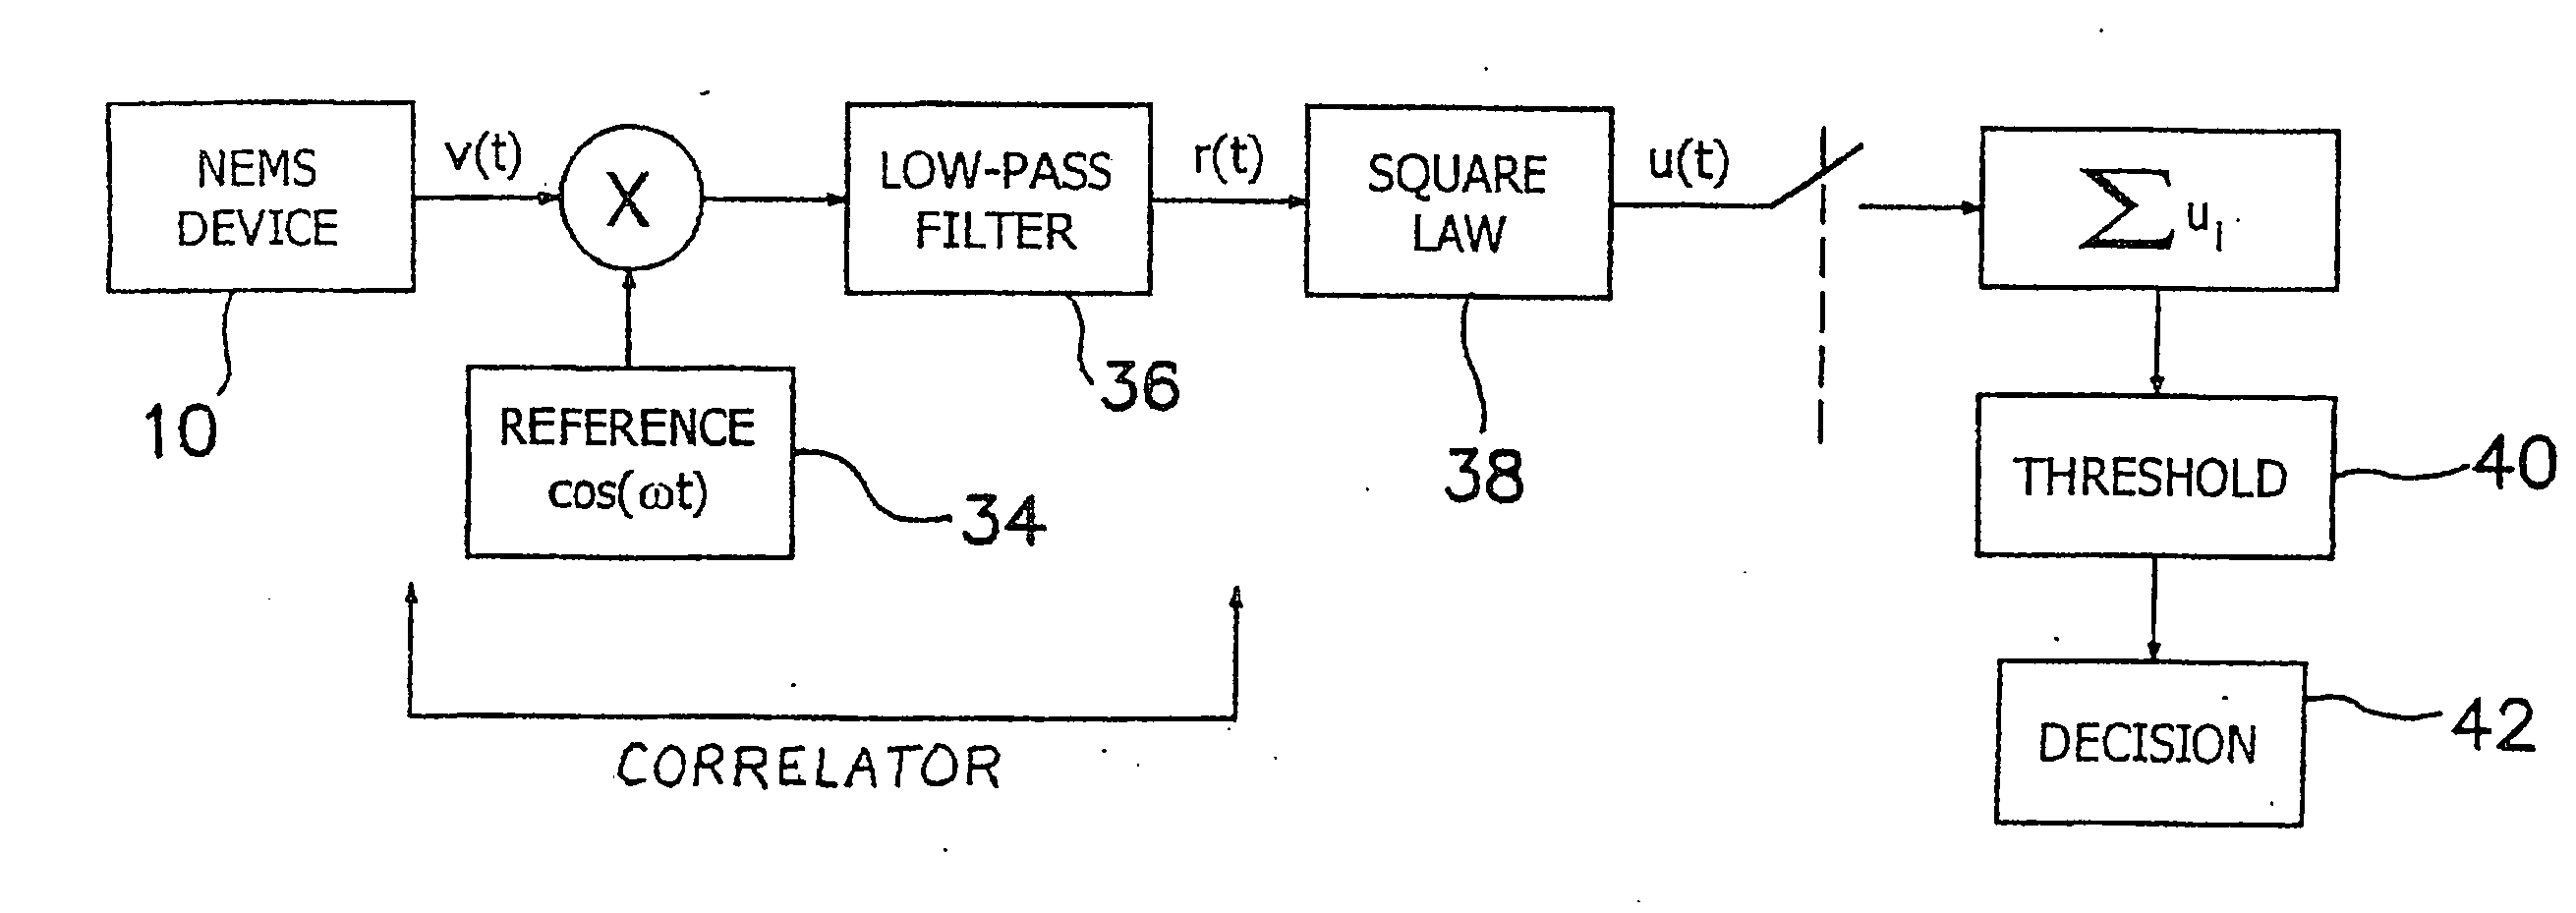 Method and apparatus for providing signal analysis of a bionems resonator or transducer